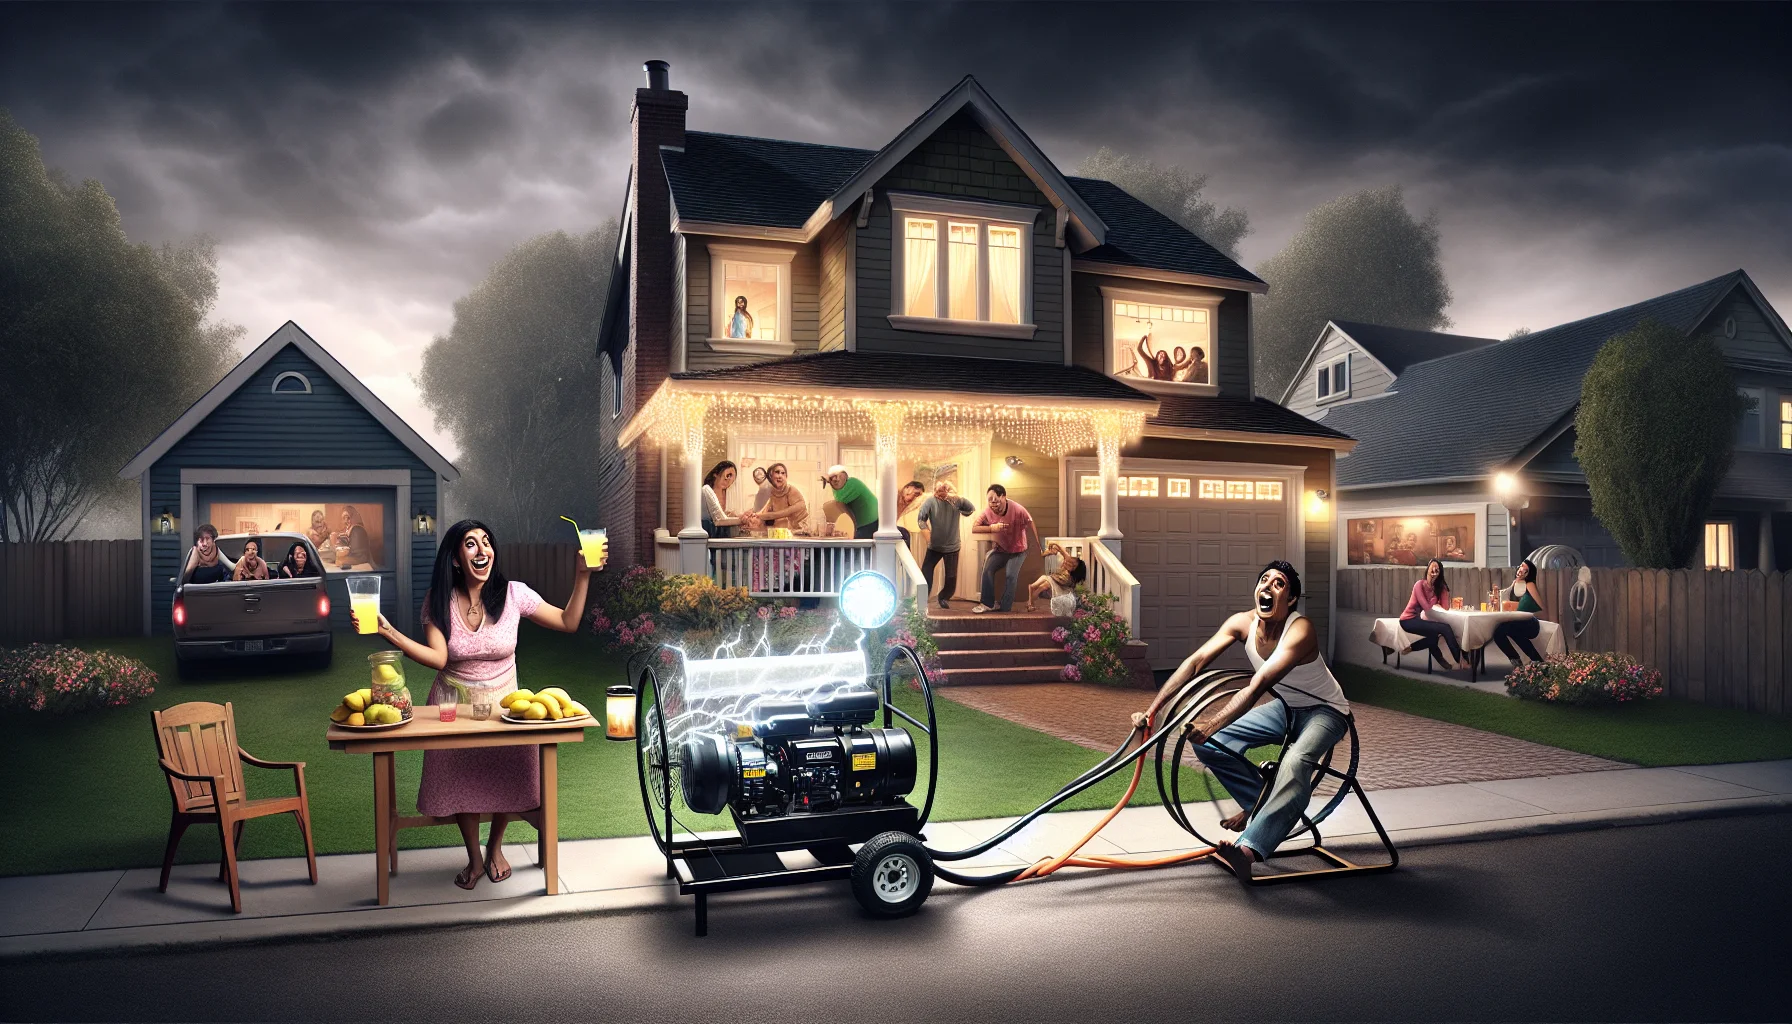 Generate a humorous and realistic image that makes power issues entertaining. Picture a suburban neighborhood with a row of houses. Each house is in darkness due to a power cut, with the exception of one house, radiating light and activity. A South Asian woman is at the front of this brightly lit house, cheerfully serving lemonade. A Middle-Eastern man is energetically running on a large, oversized hamster wheel that's connected to a whole-house generator. The generator is humorously emitting sparks, powering not only the house but also a vibrant disco ball hanging from a tree. The rest of the neighborhood is looking over in envy and amusement.